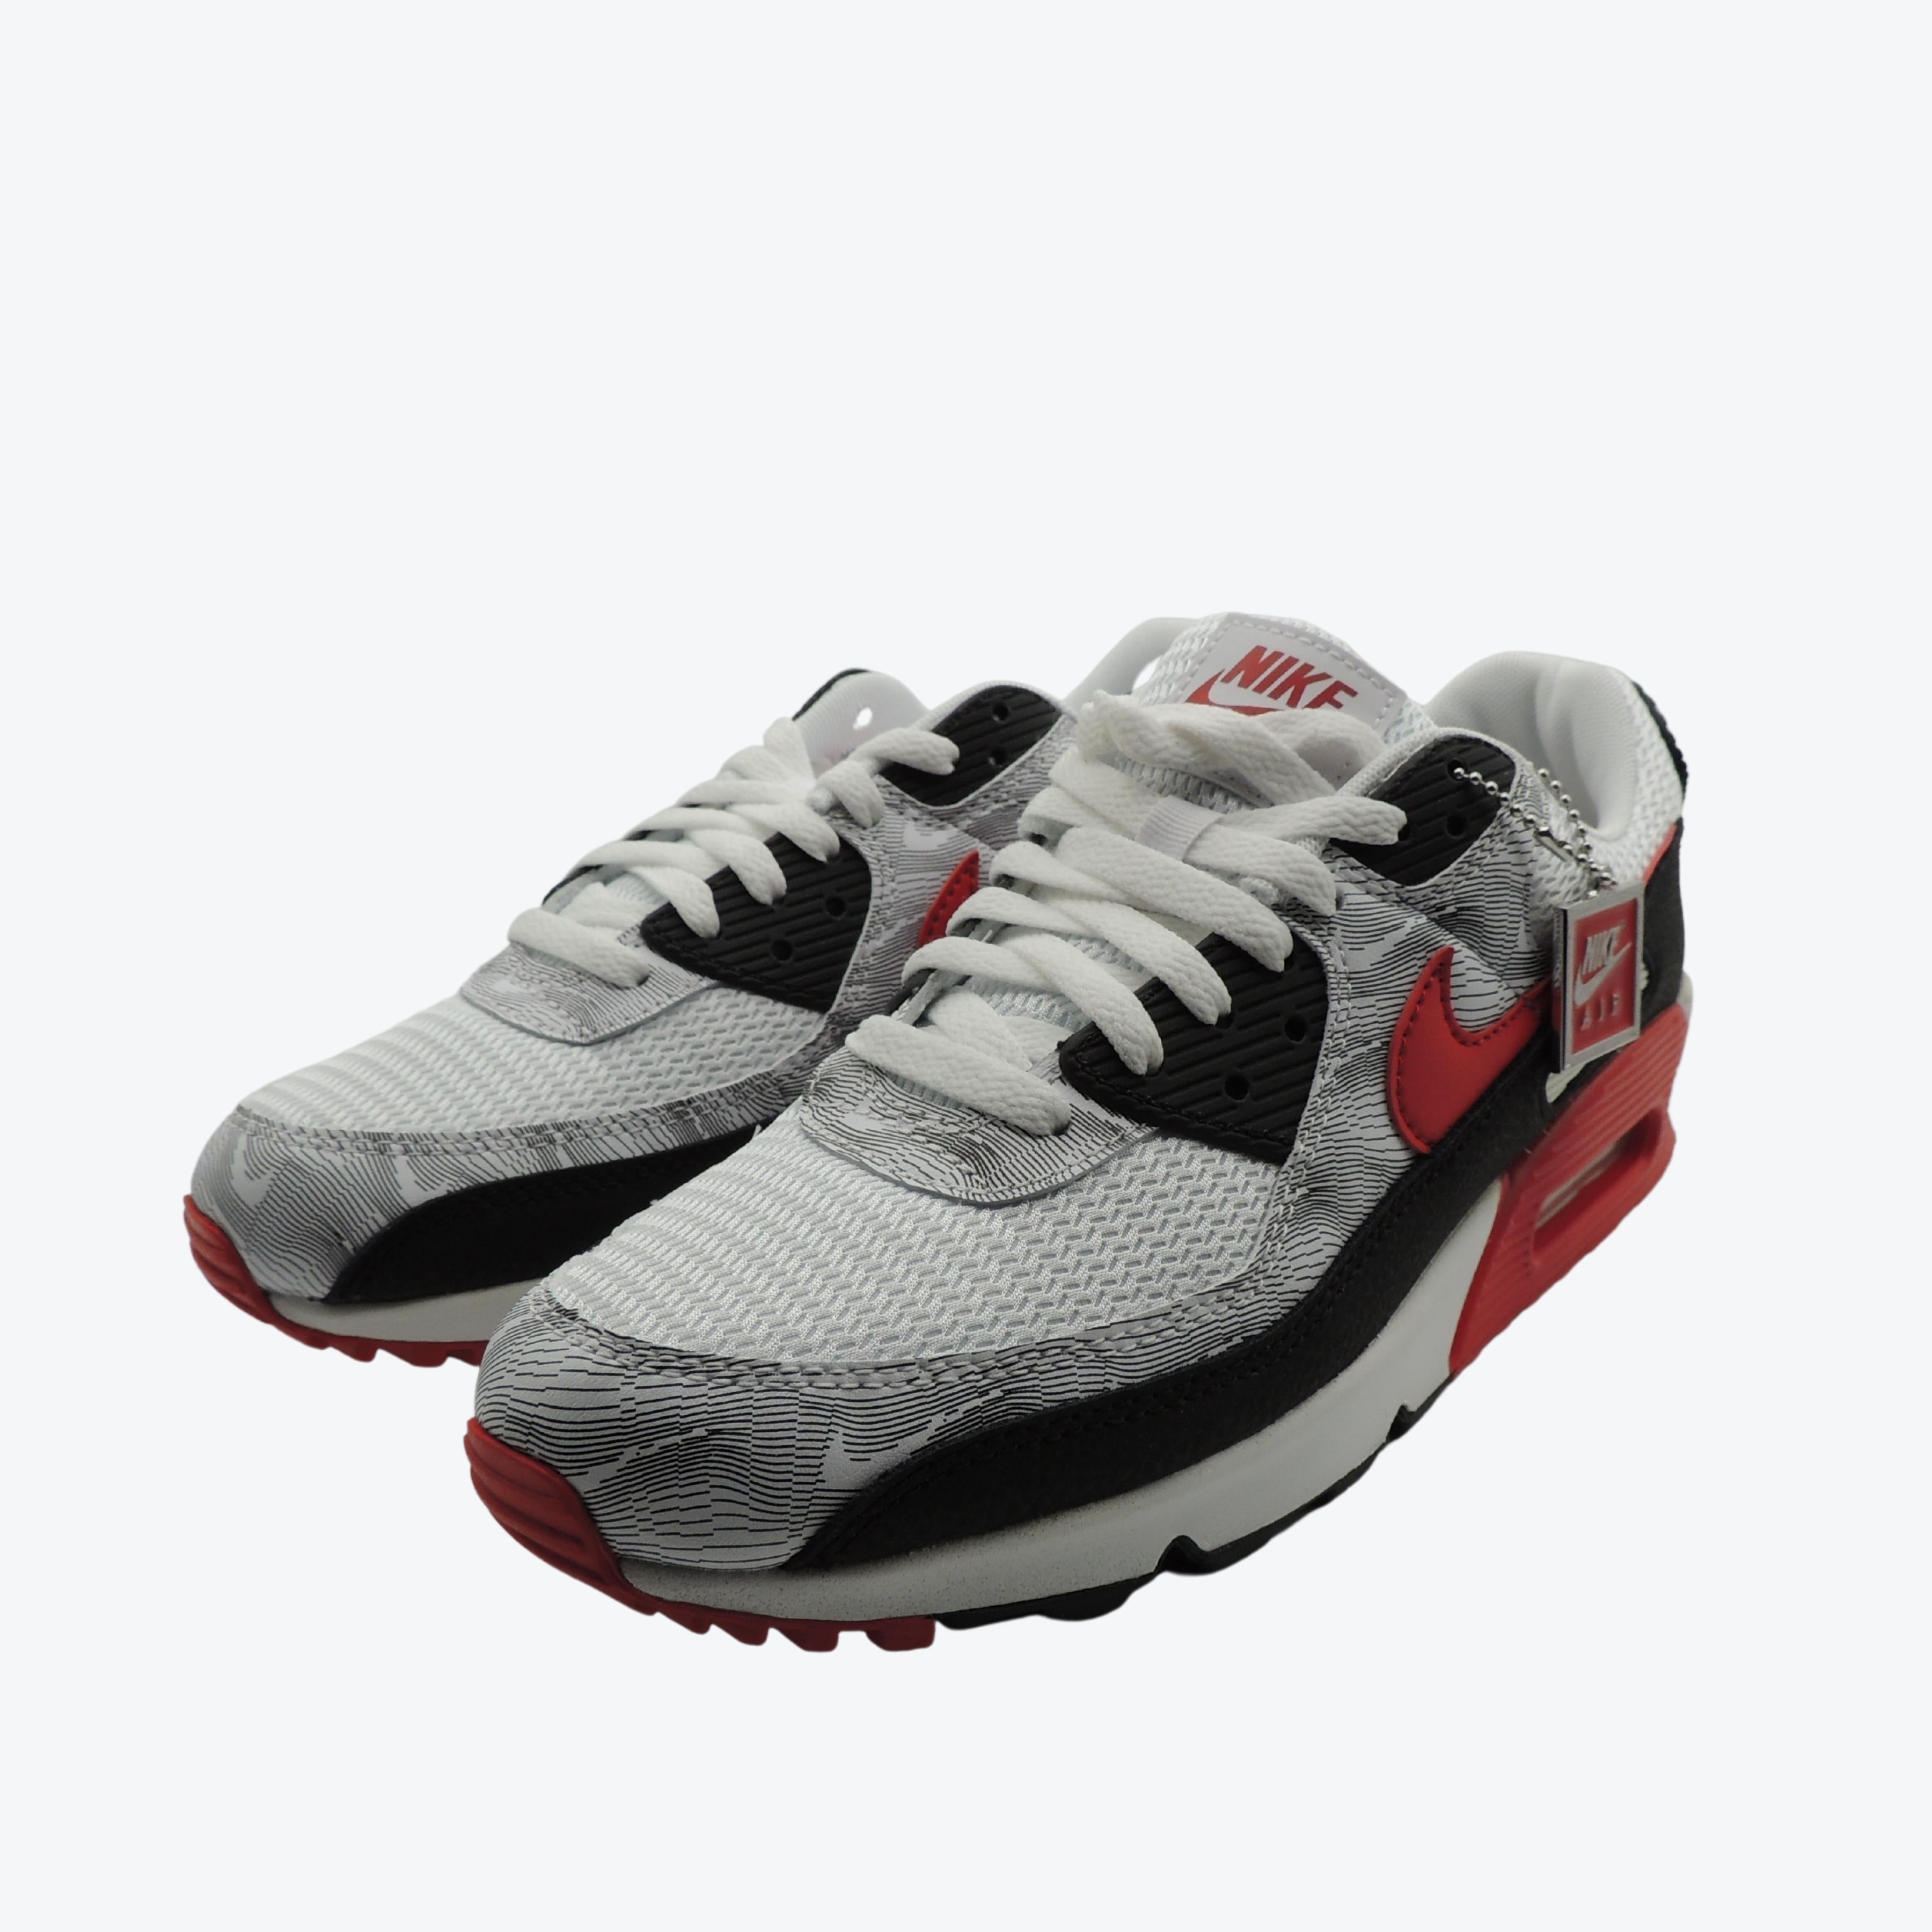 Nike Air Max 90 Topography In White/University Red UK 8.5